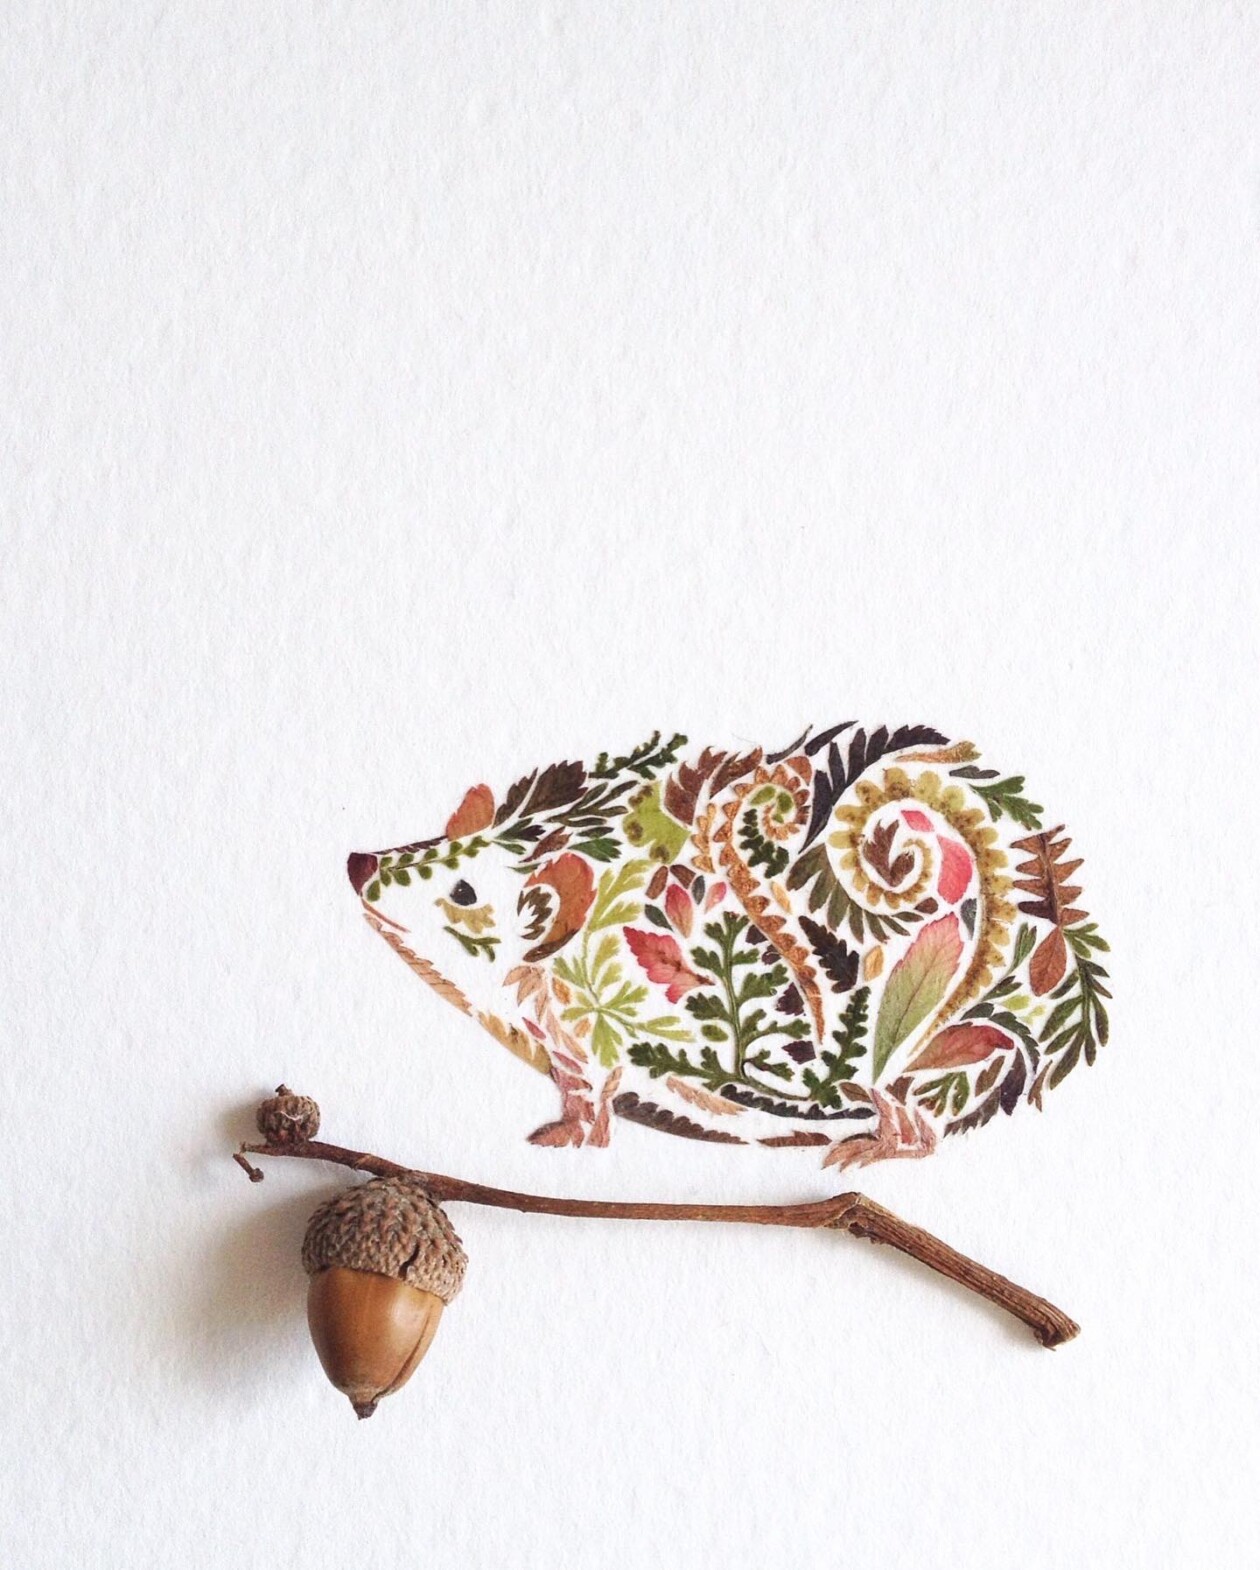 Illustrations Made Of Pressed Leaves And Flowers By Helen Ahpornsiri (24)